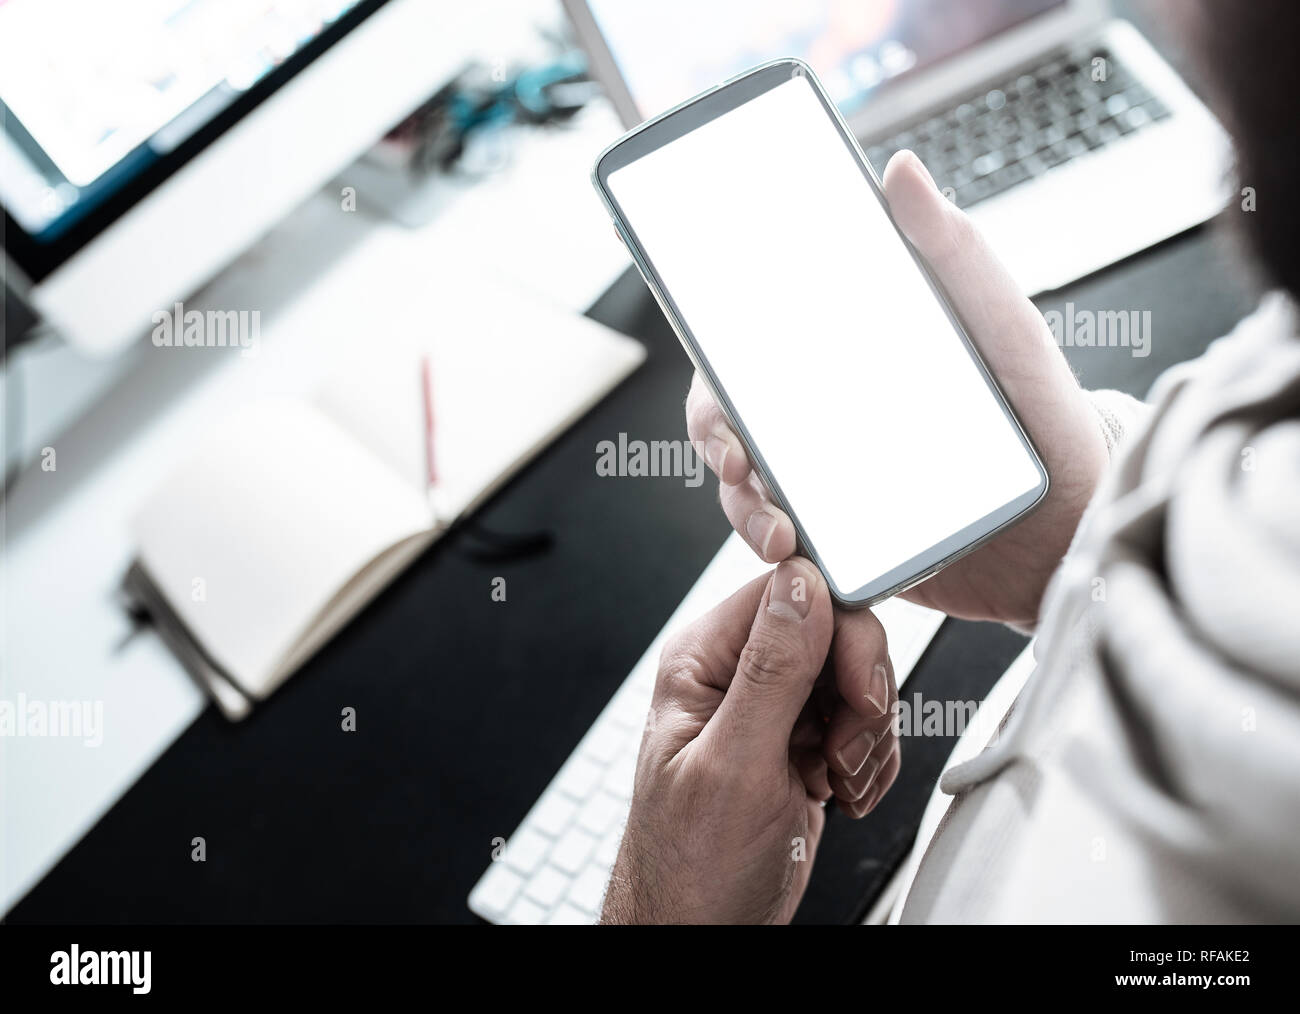 man using smartphone at office desk Stock Photo